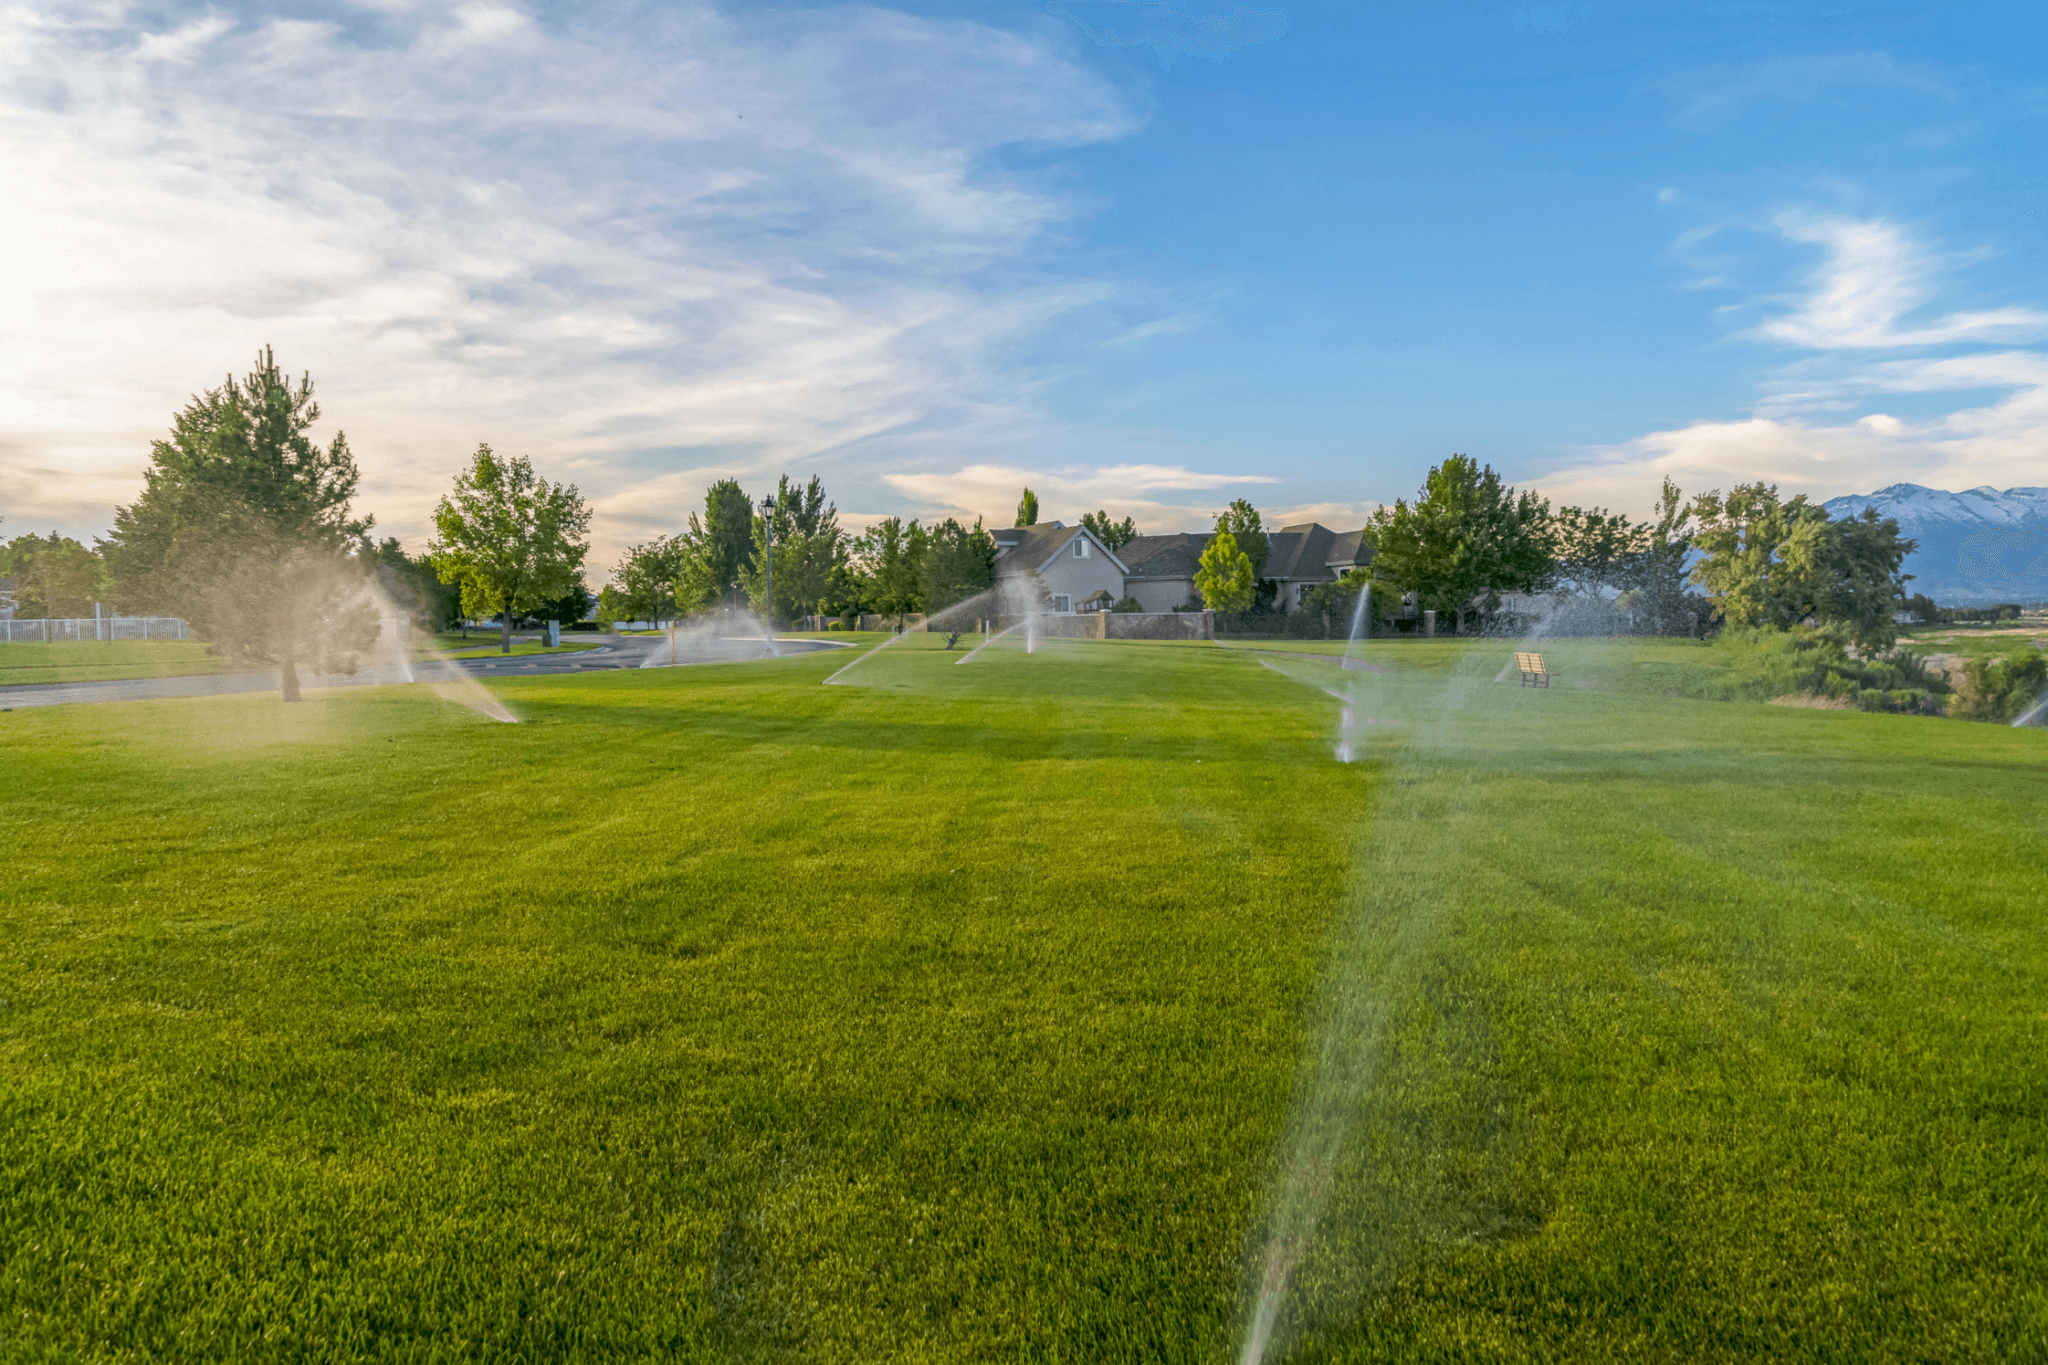 large field of grass being watered by sprinklers in the day with houses and mountains in the background